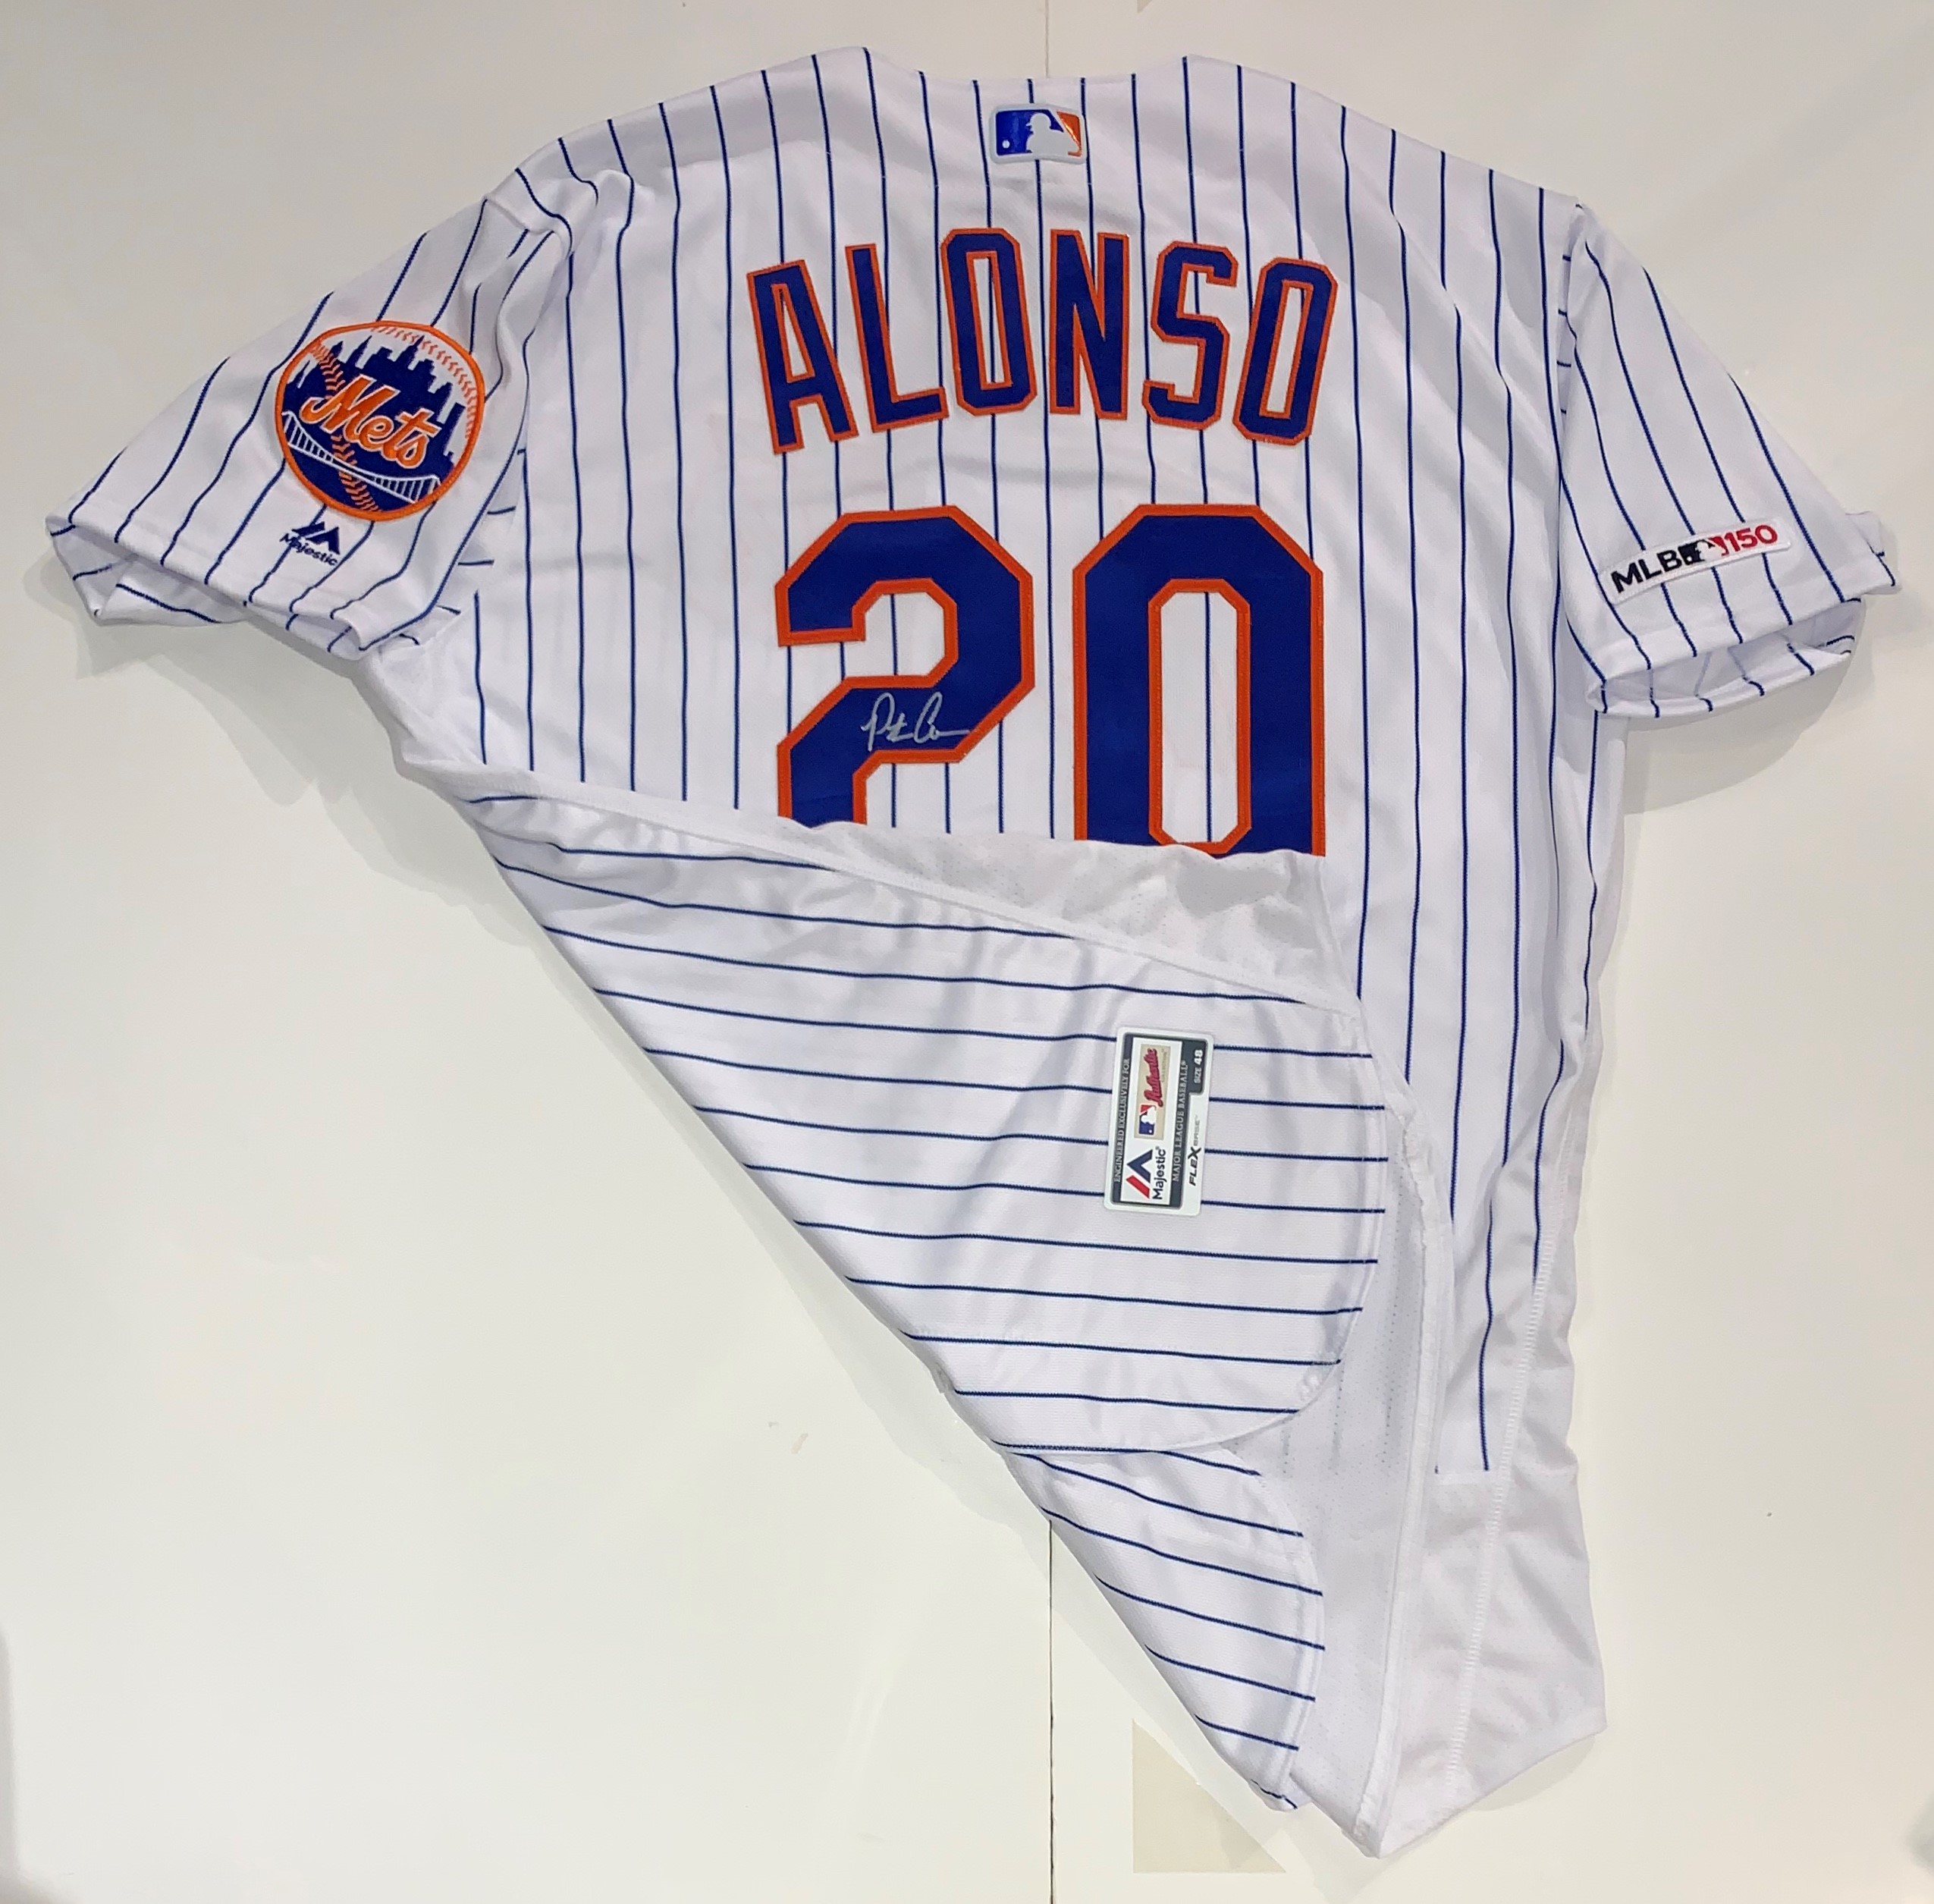 Pete Alonso Signed/Autographed Authentic Jersey MLB 150 Fanatics